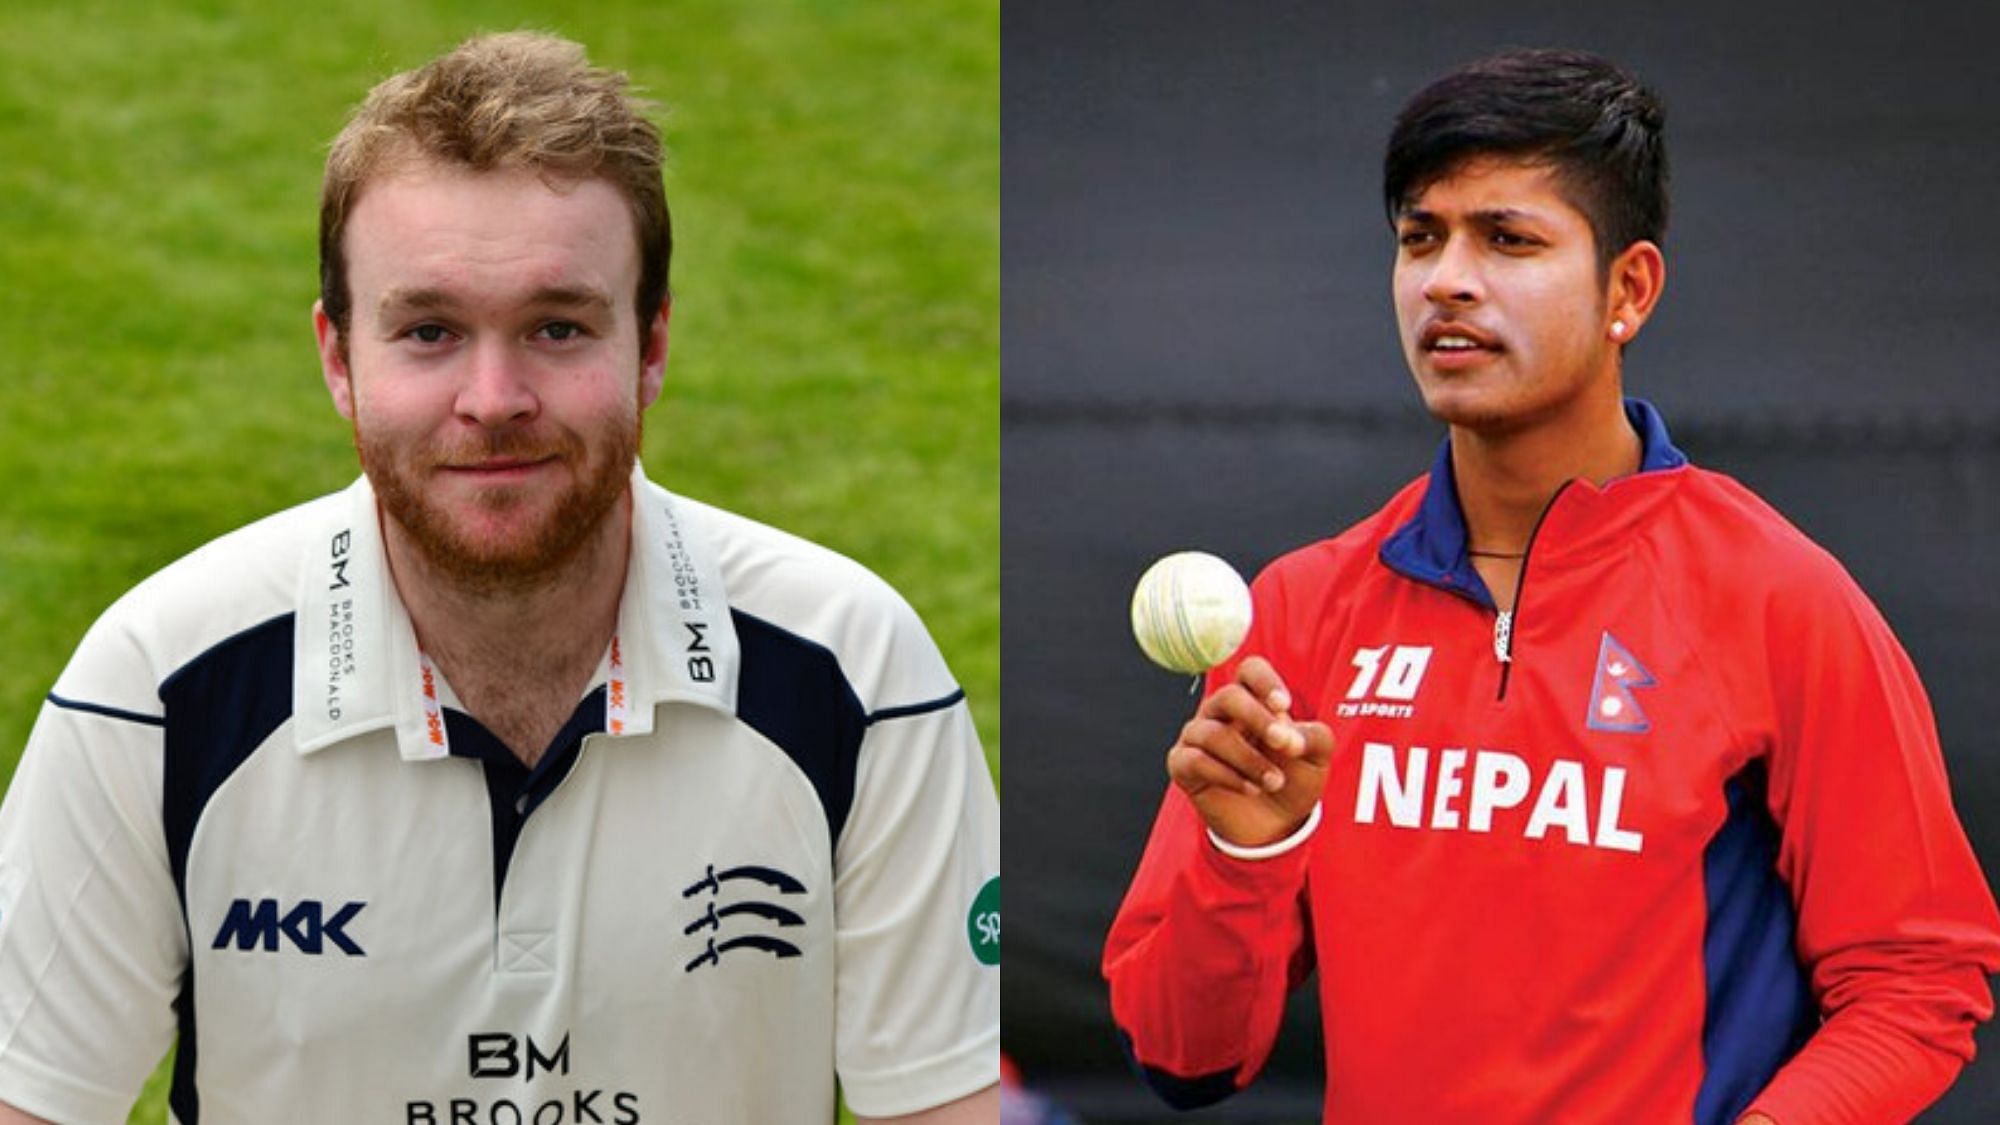 Ireland batsman Paul Sterling and Nepal leg-spinner Sandeep Lamichhane finished 2019 at the top of the charts in T20 Internationals.